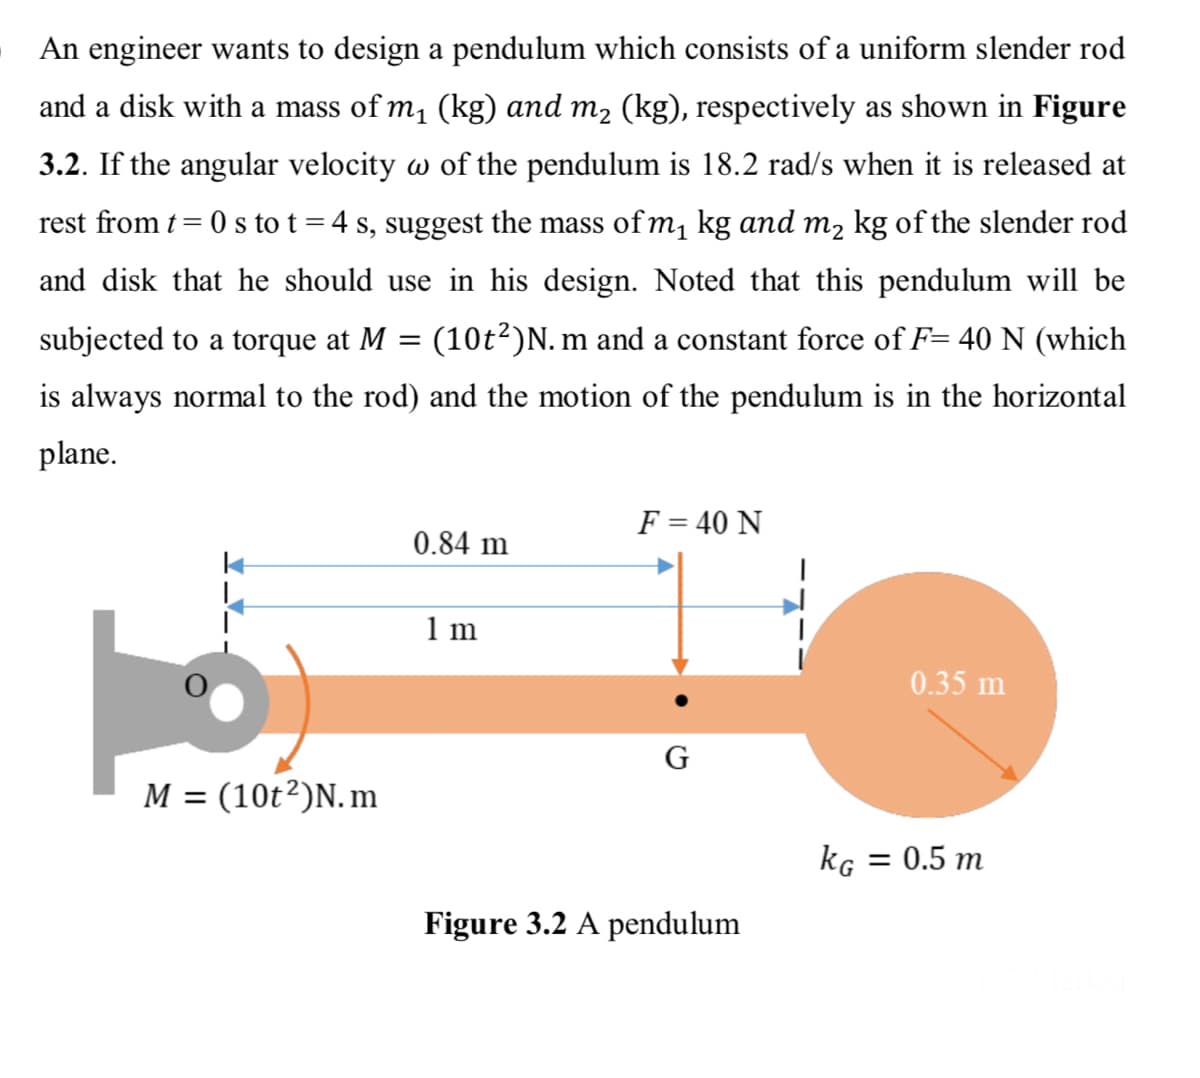 An engineer wants to design a pendulum which consists of a uniform slender rod
and a disk with a mass of m, (kg) and m2 (kg), respectively as shown in Figure
3.2. If the angular velocity w of the pendulum is 18.2 rad/s when it is released at
rest from t= 0 s to t =4 s, suggest the mass of m, kg and m, kg of the slender rod
and disk that he should use in his design. Noted that this pendulum will be
subjected to a torque at M = (10t²)N. m and a constant force of F= 40 N (which
is always normal to the rod) and the motion of the pendulum is in the horizontal
plane.
F = 40 N
0.84 m
1 m
0.35 m
G
M = (10t²)N. m
kg = 0.5 m
Figure 3.2 A pendulum
